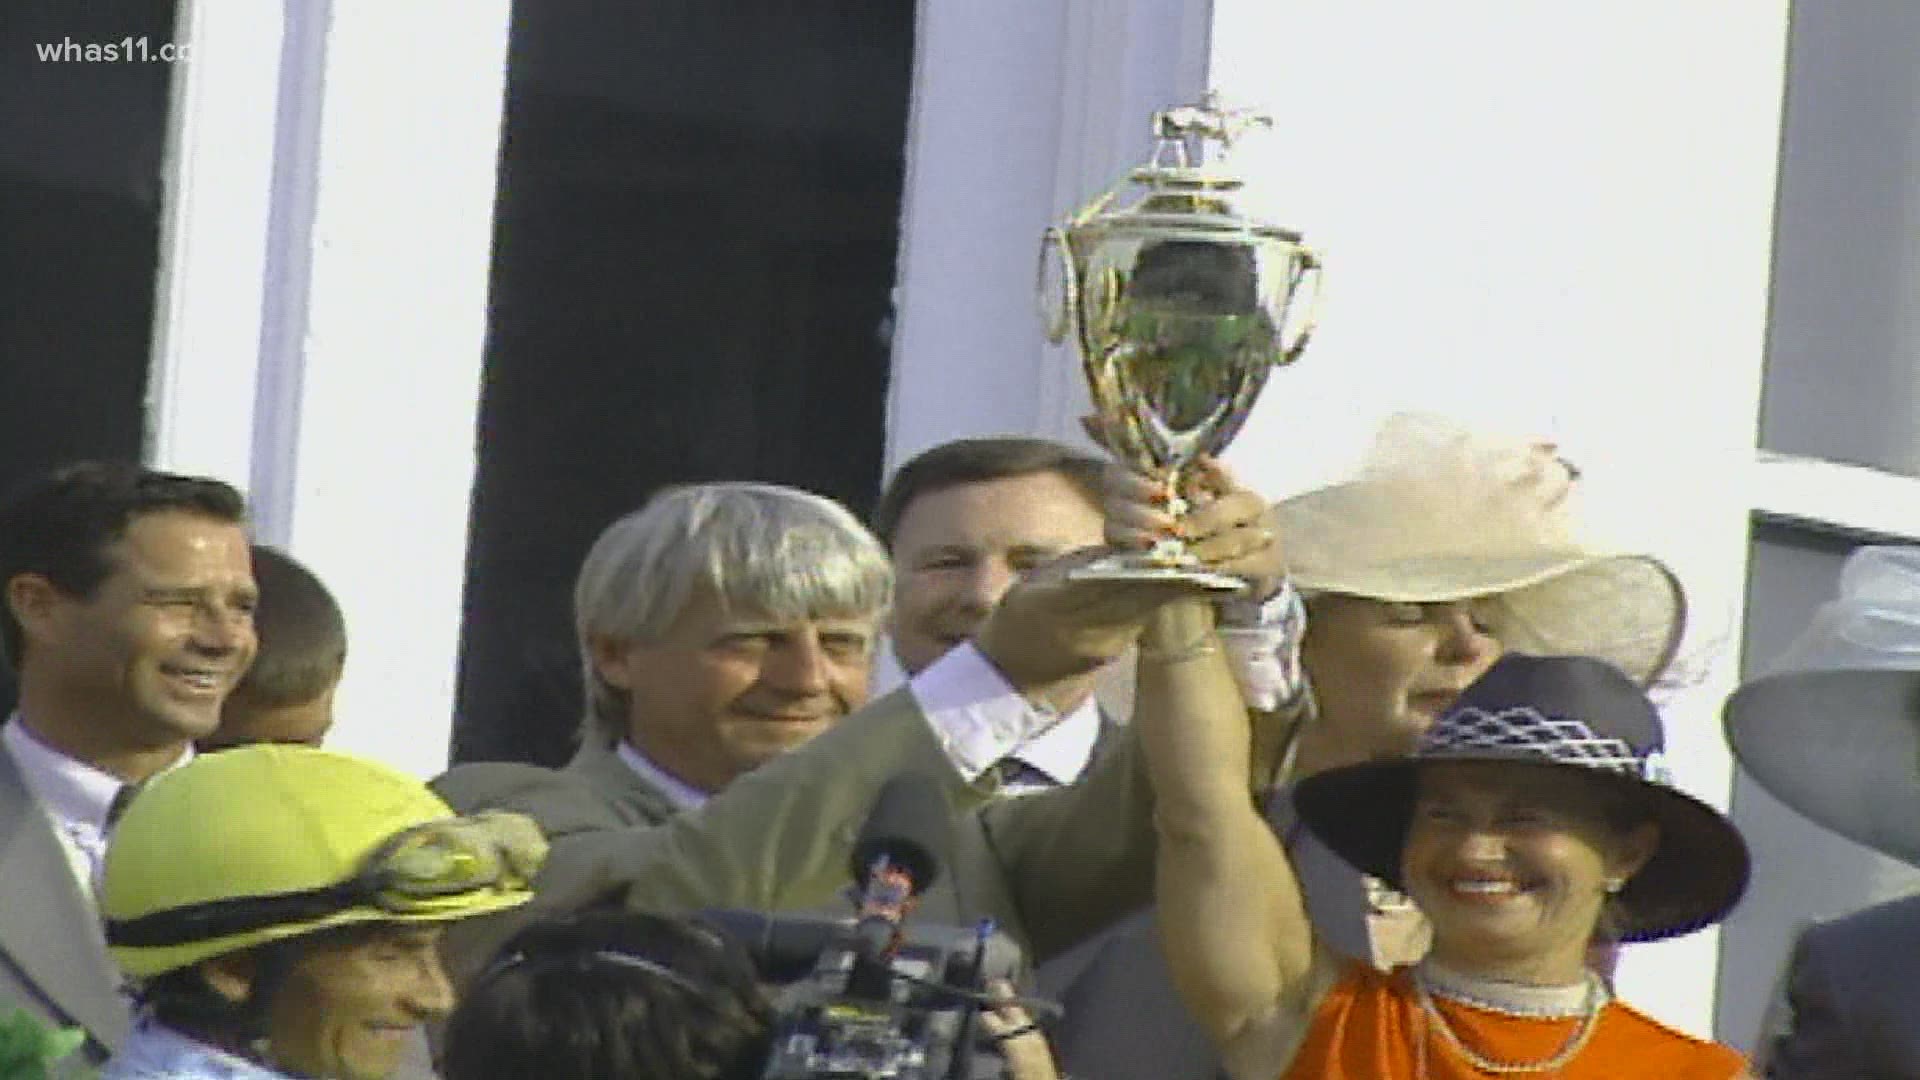 Officials said the 2001 Kentucky Derby winning trainer passed away Saturday.